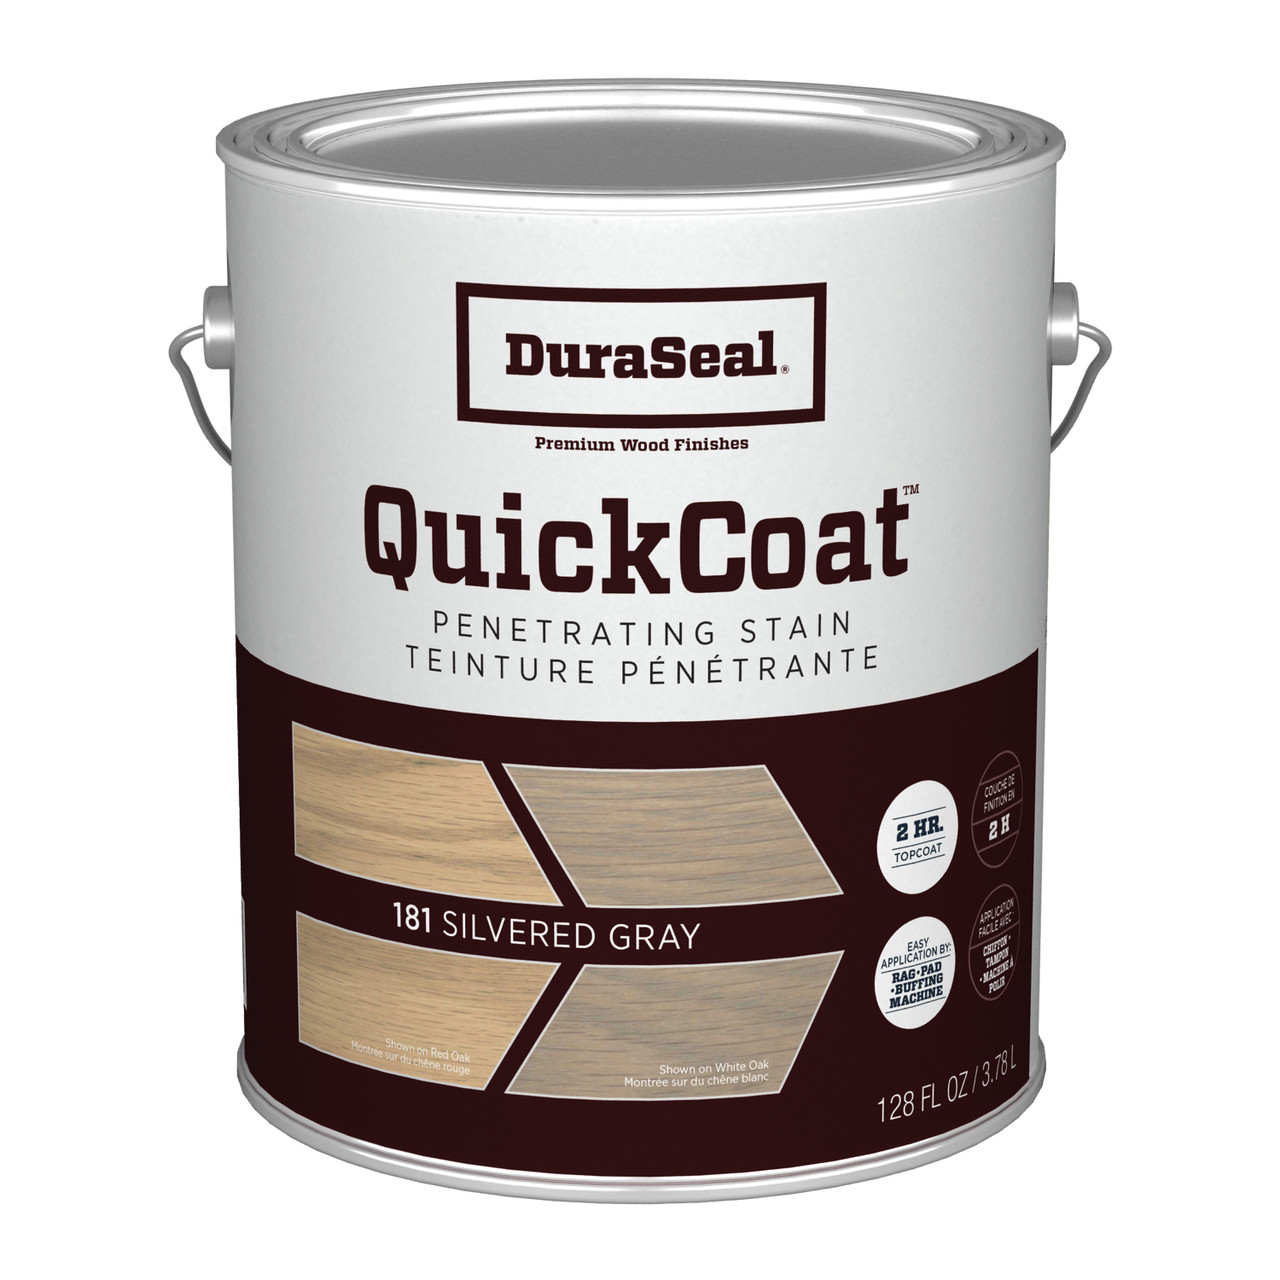 DuraSeal Quick Coat Stain - Silvered Gray/Grey Gallon